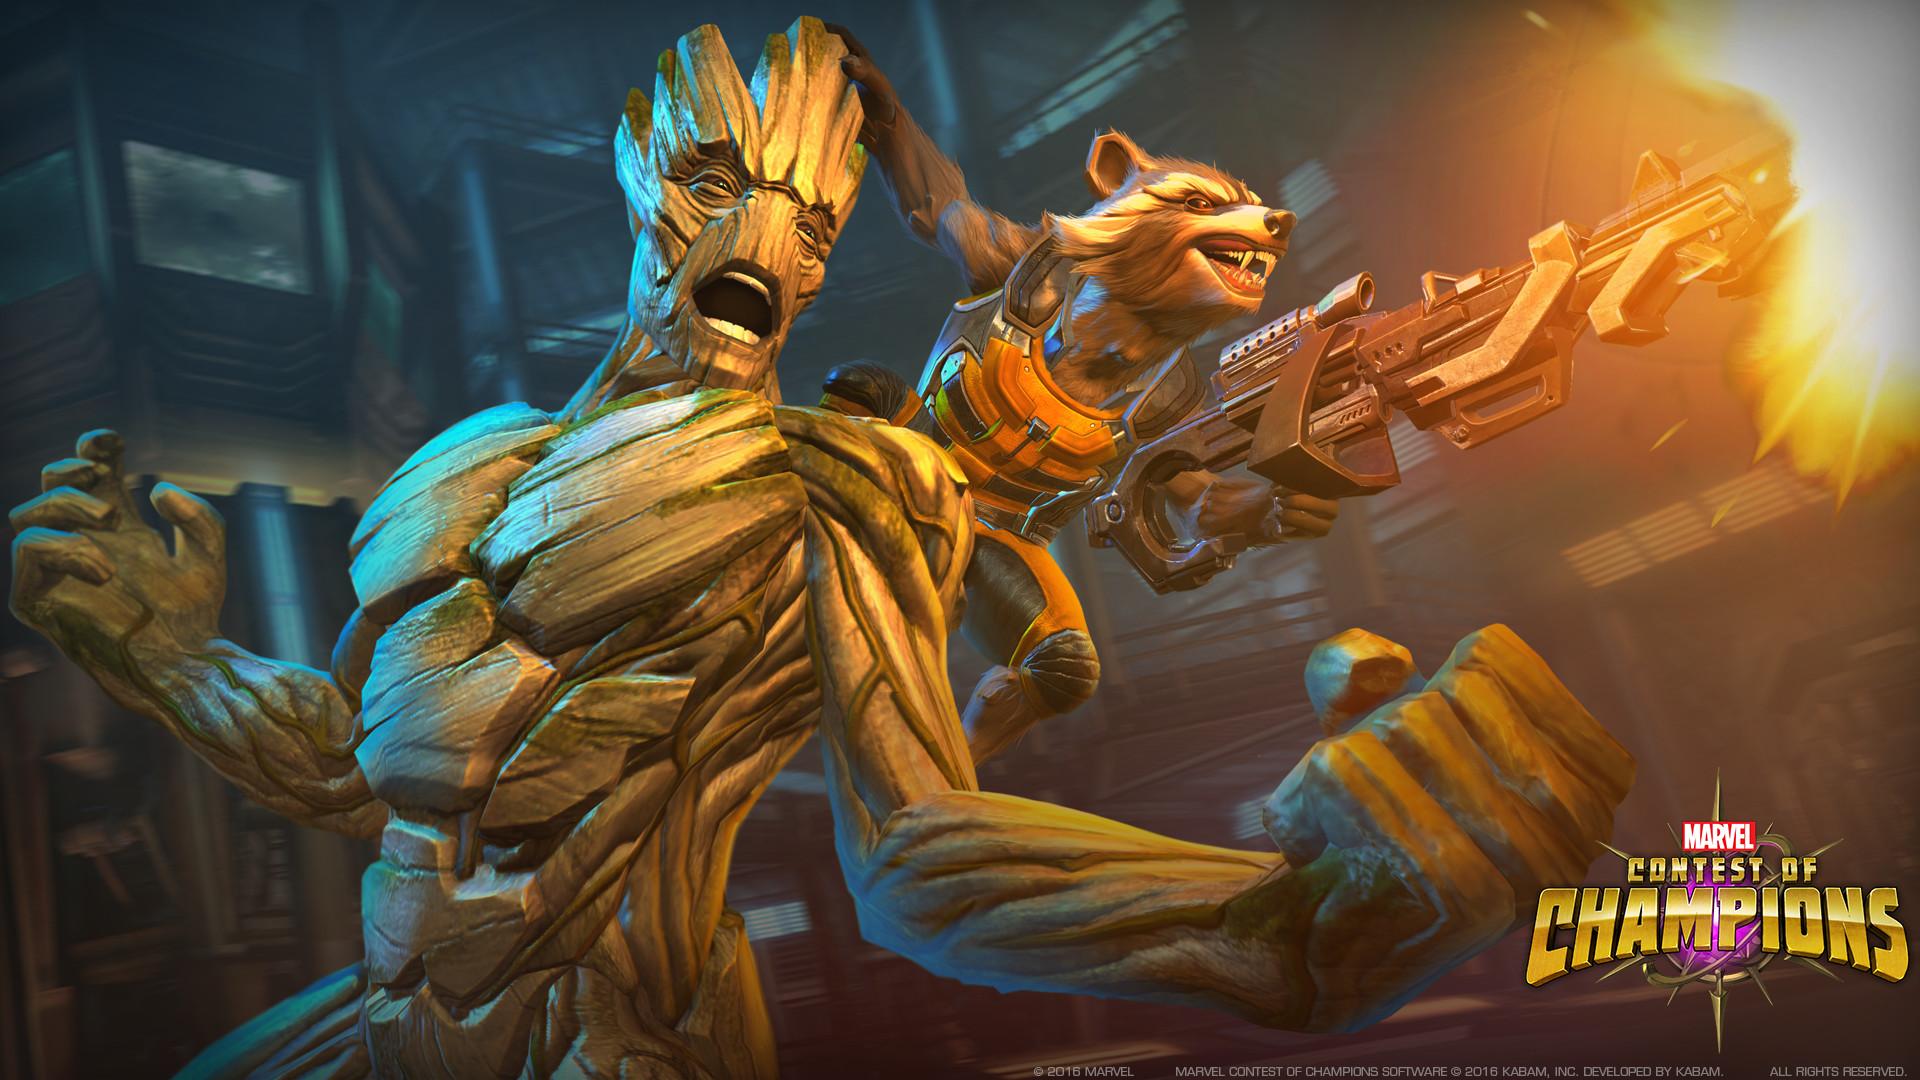 Groot and his buddy Rocket, lee romao